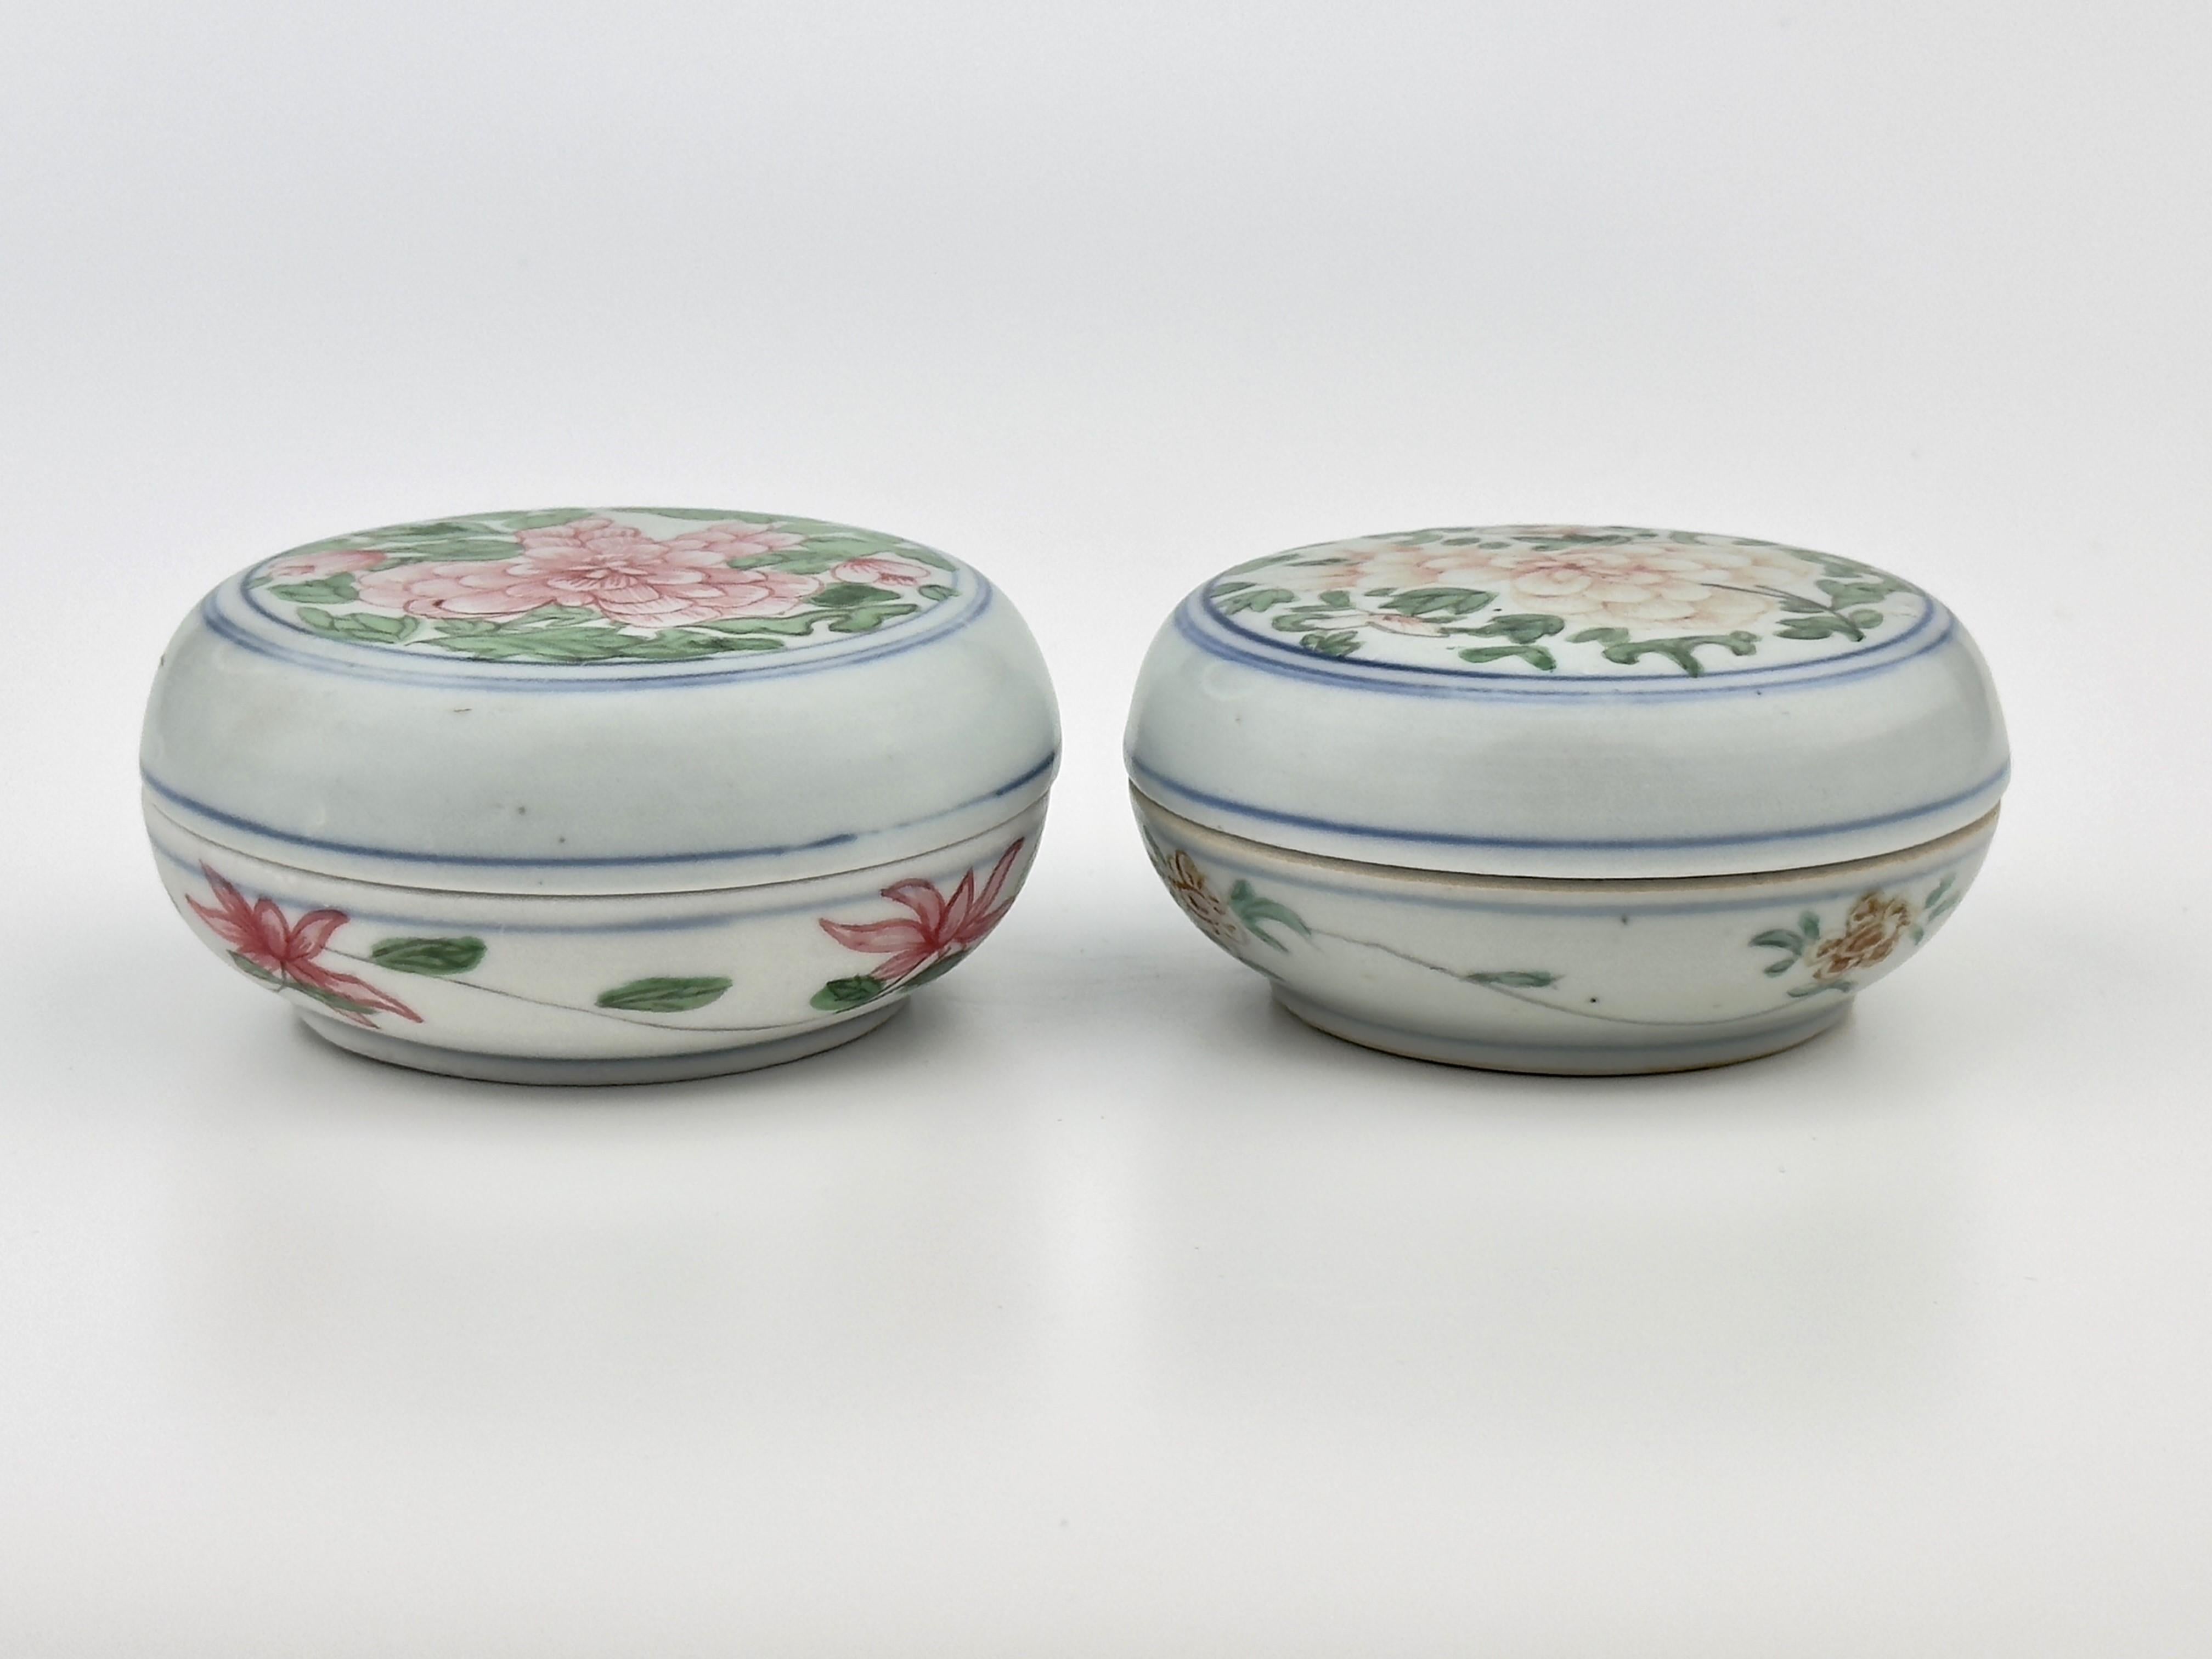 Circular form with flattened doomed covers, the covers with a medallion of flower with full bloom, the bowls with two round borders.

Period : Qing Dynasty, Kangxi-Yongzheng Period
Production Date : 17-18th century
Made in : Jingdezhen
Destination :